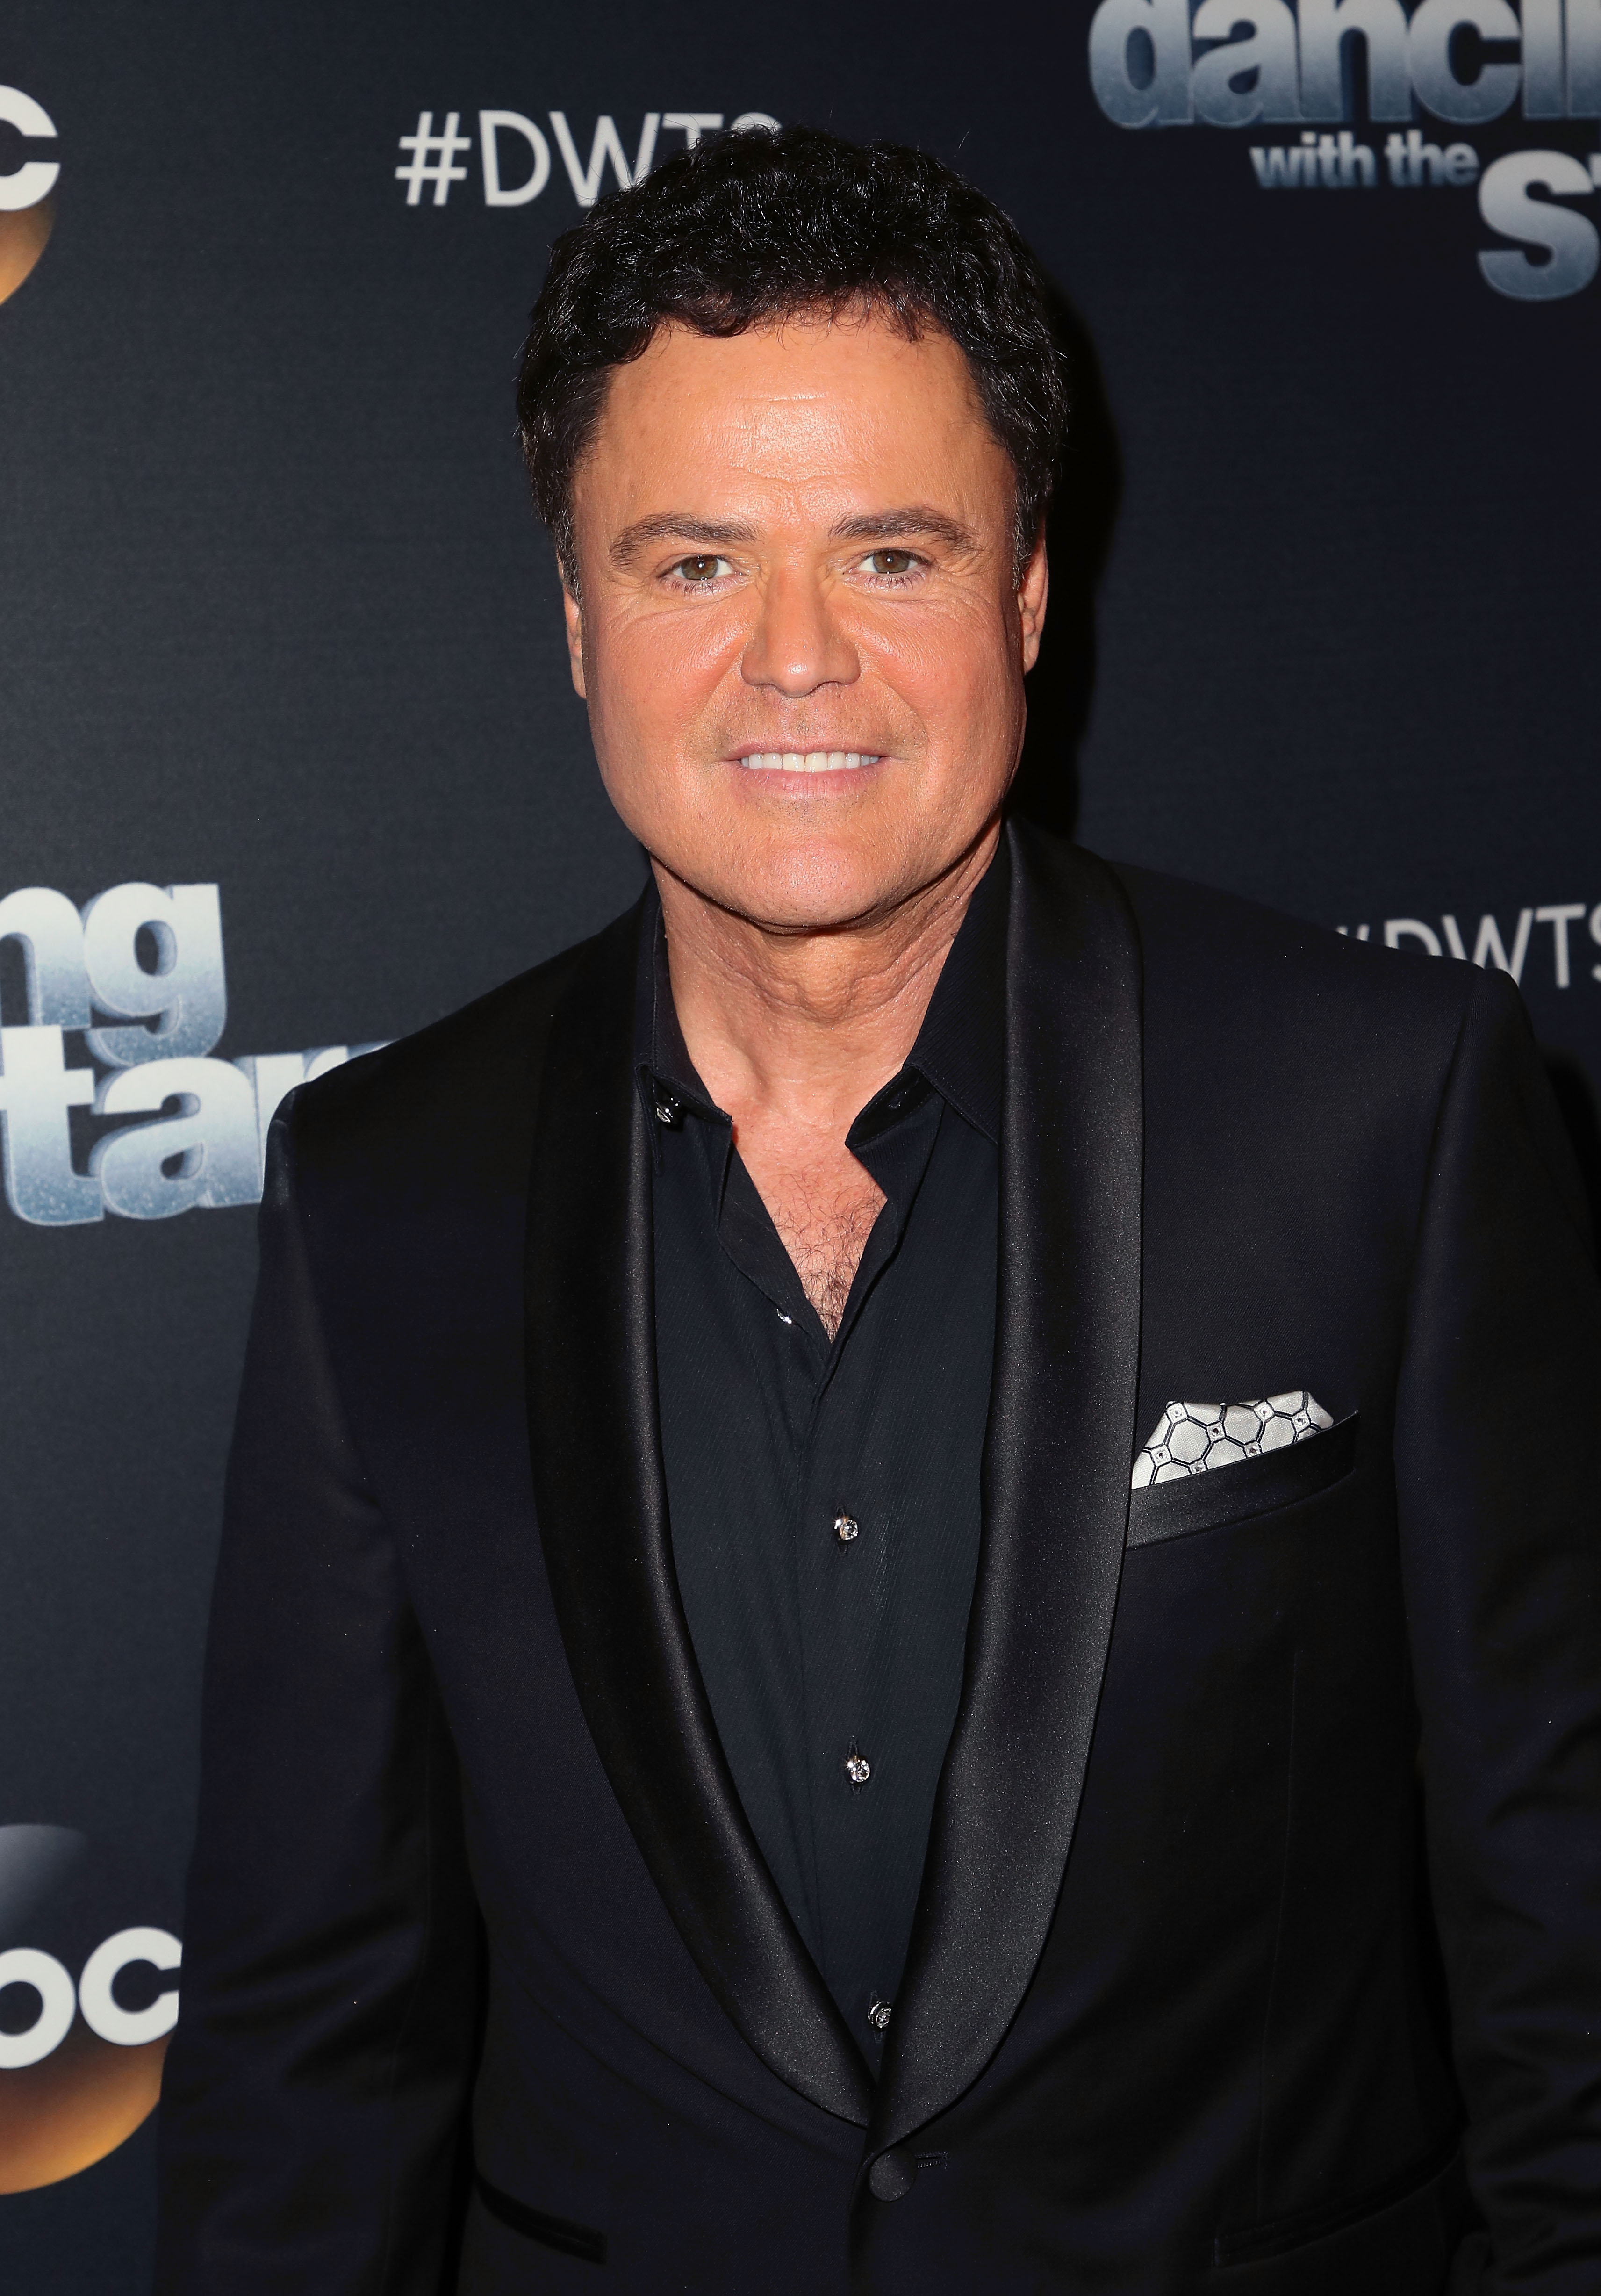 Donny Osmond poses at "Dancing with the Stars" Season 27 on October 2, 2018, in Los Angeles, California. | Source: Getty Images.